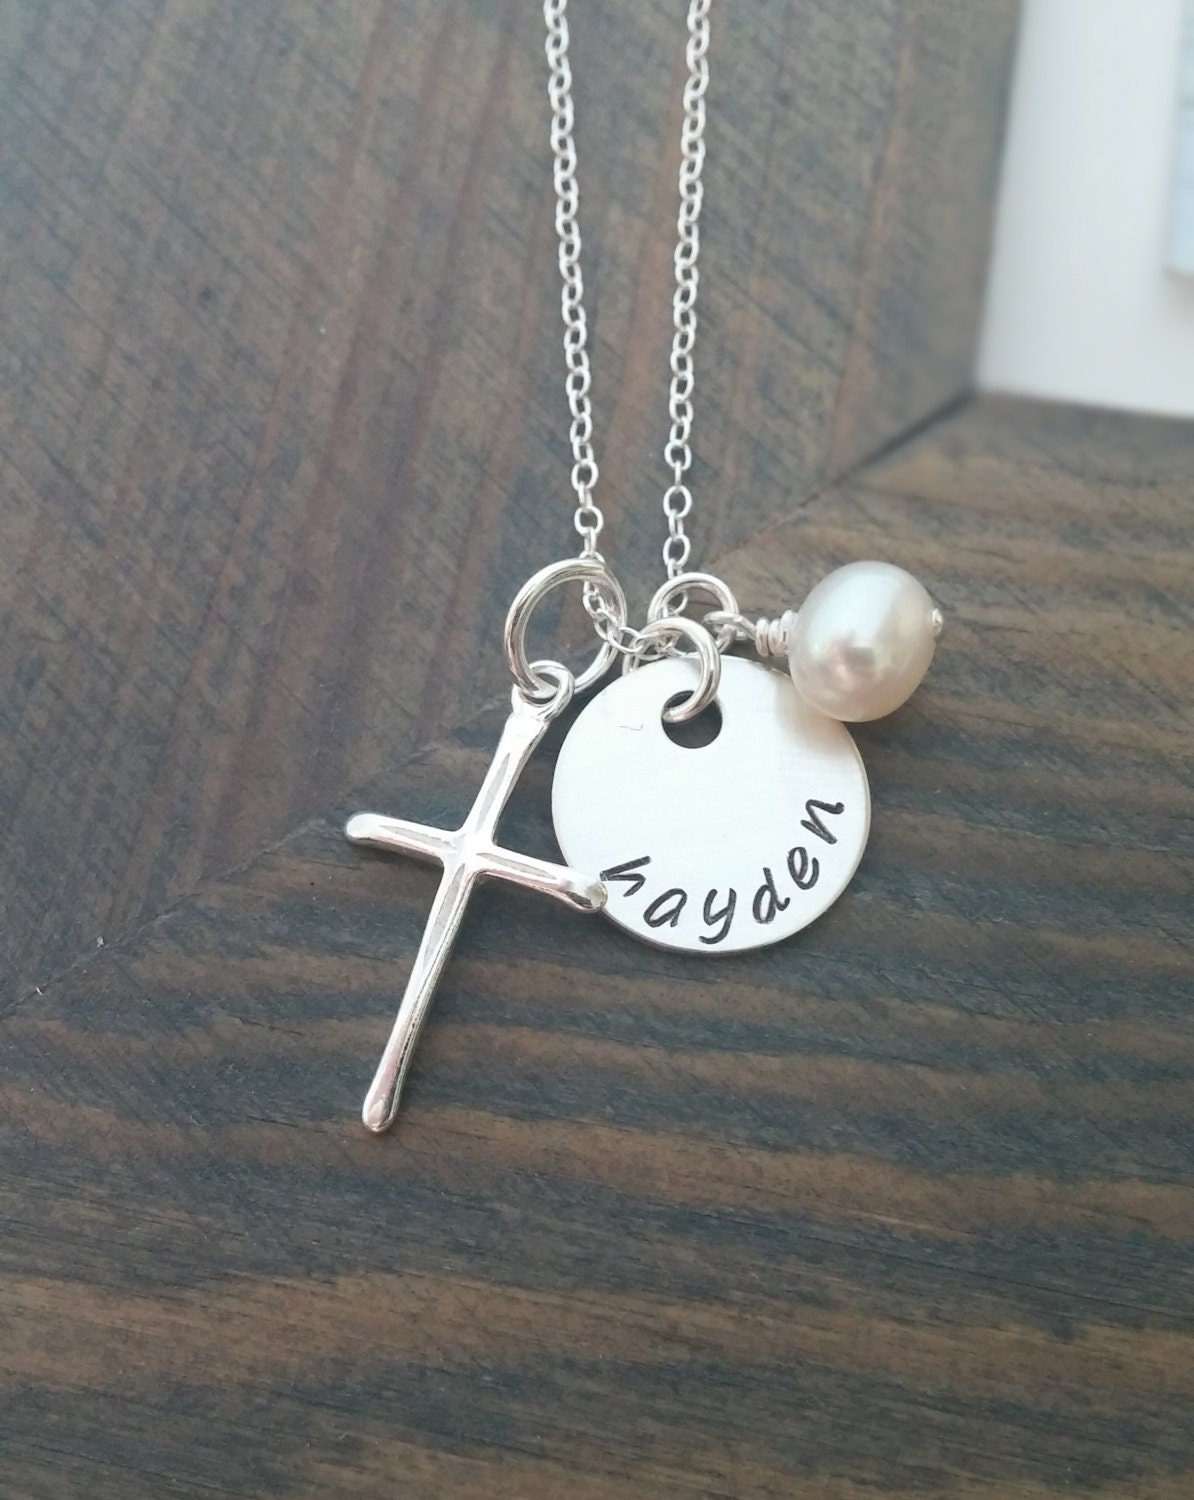 Personalized Sterling Silver Cross Necklace with Hand Stamped